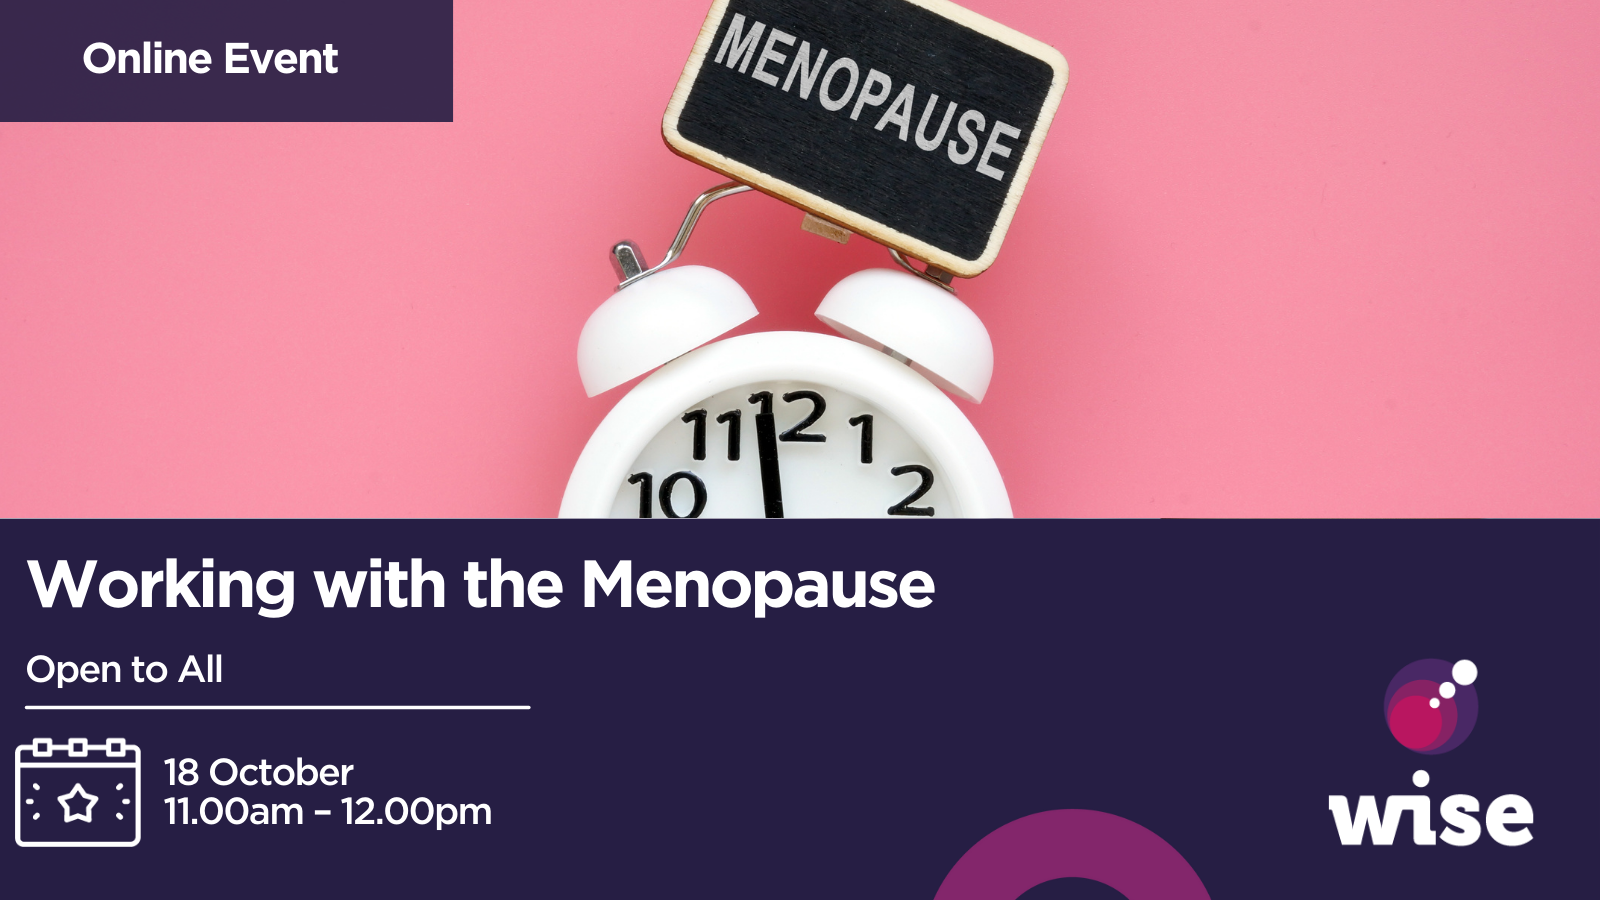 working with the menopause event